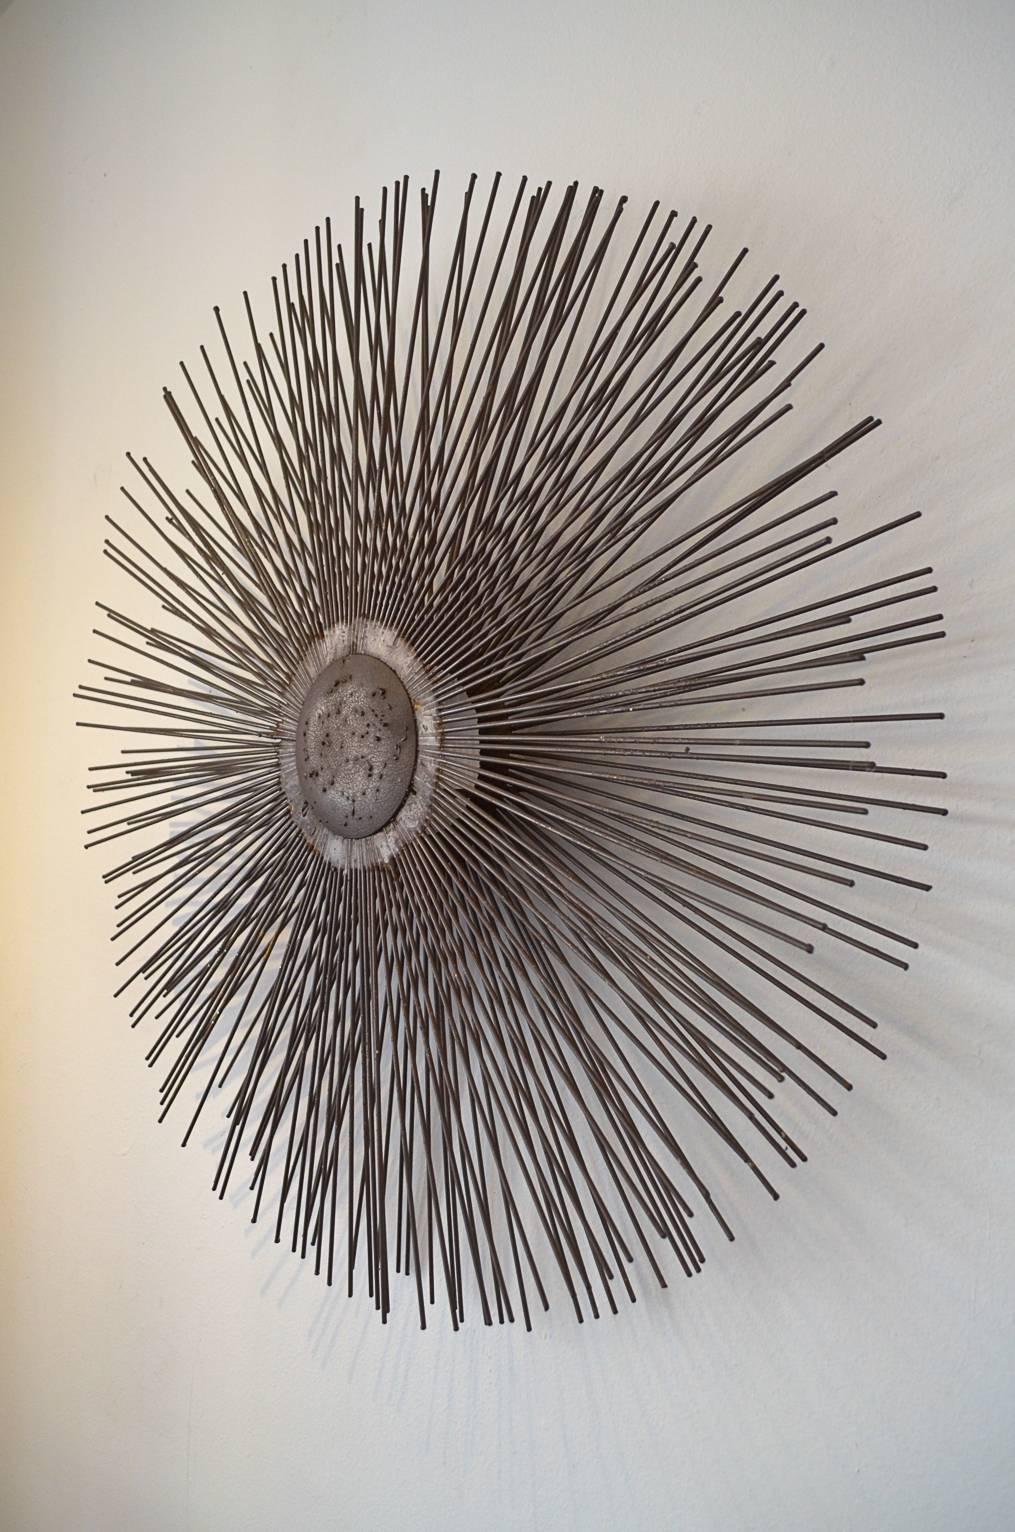 Metal sunburst wall art or sculpture in the manner of Curtis Jere. Three dimensional piece, contains two rows of spokes and sits 4